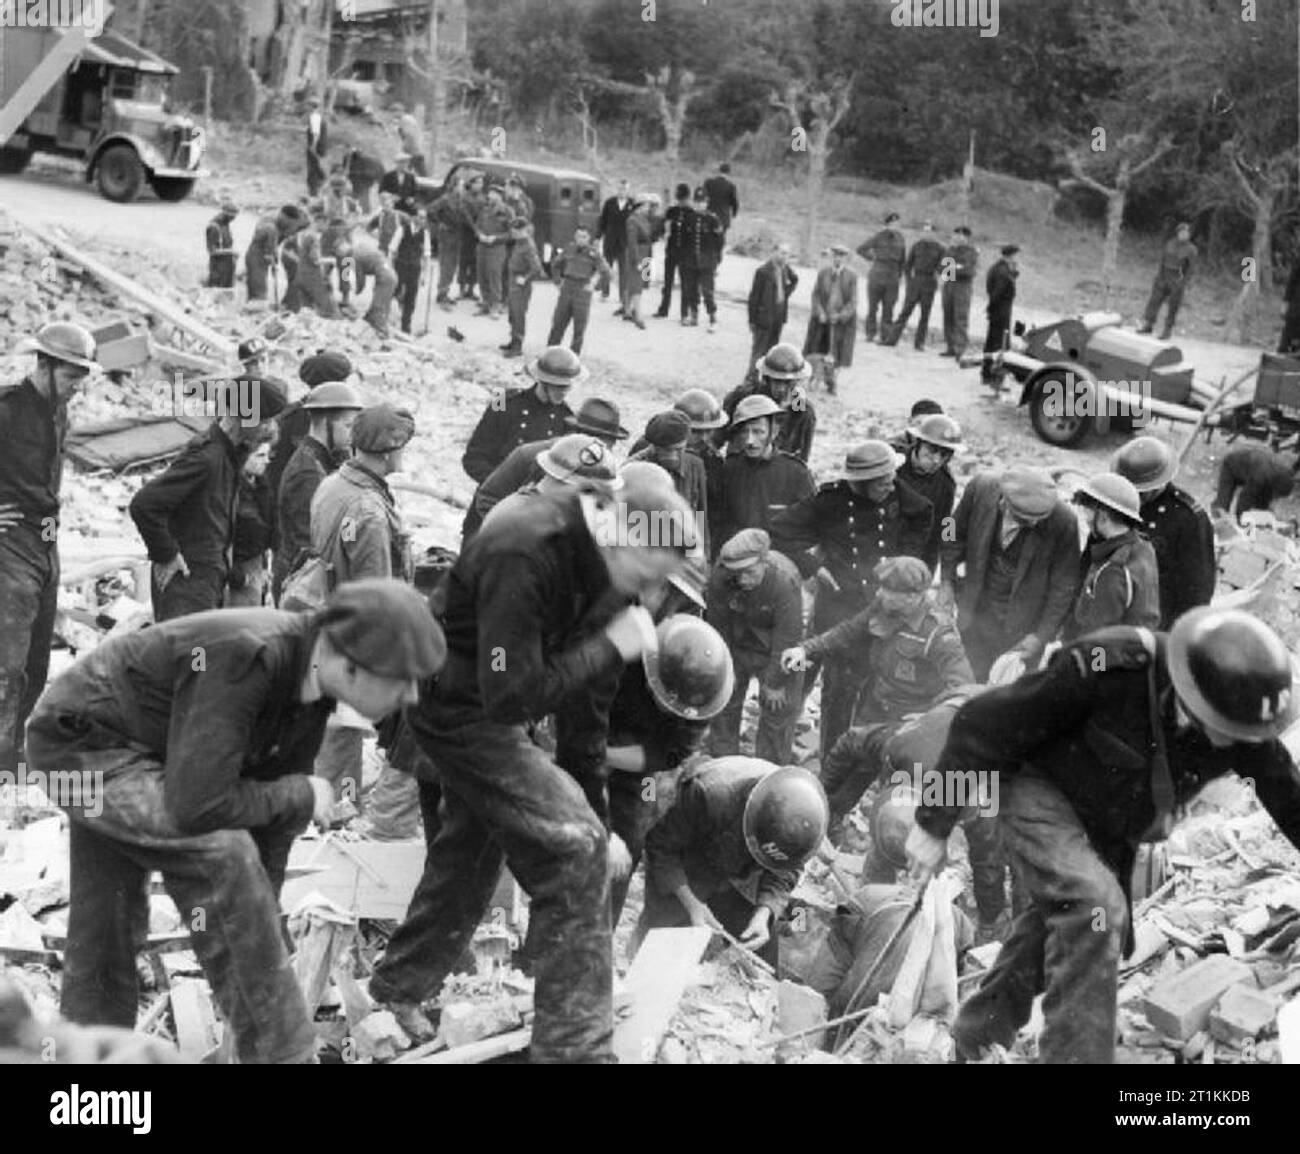 Flying Bomb- V1 Bomb Damage in London, England, UK, 1944 Civil Defence rescue workers search for survivors under a huge pile of rubble and timbers following a V1 attack in the Highland Road and Lunham Road area of Upper Norwood. In the background, an ambulance of the American Ambulance Great Britain, several police officers and a National Fire Service trailer pump can be seen. In addition, a group of men of the Pioneer Corps are also visible in the top left hand corner. They are waiting for instructions on where to dig from the rescue squads. Stock Photo